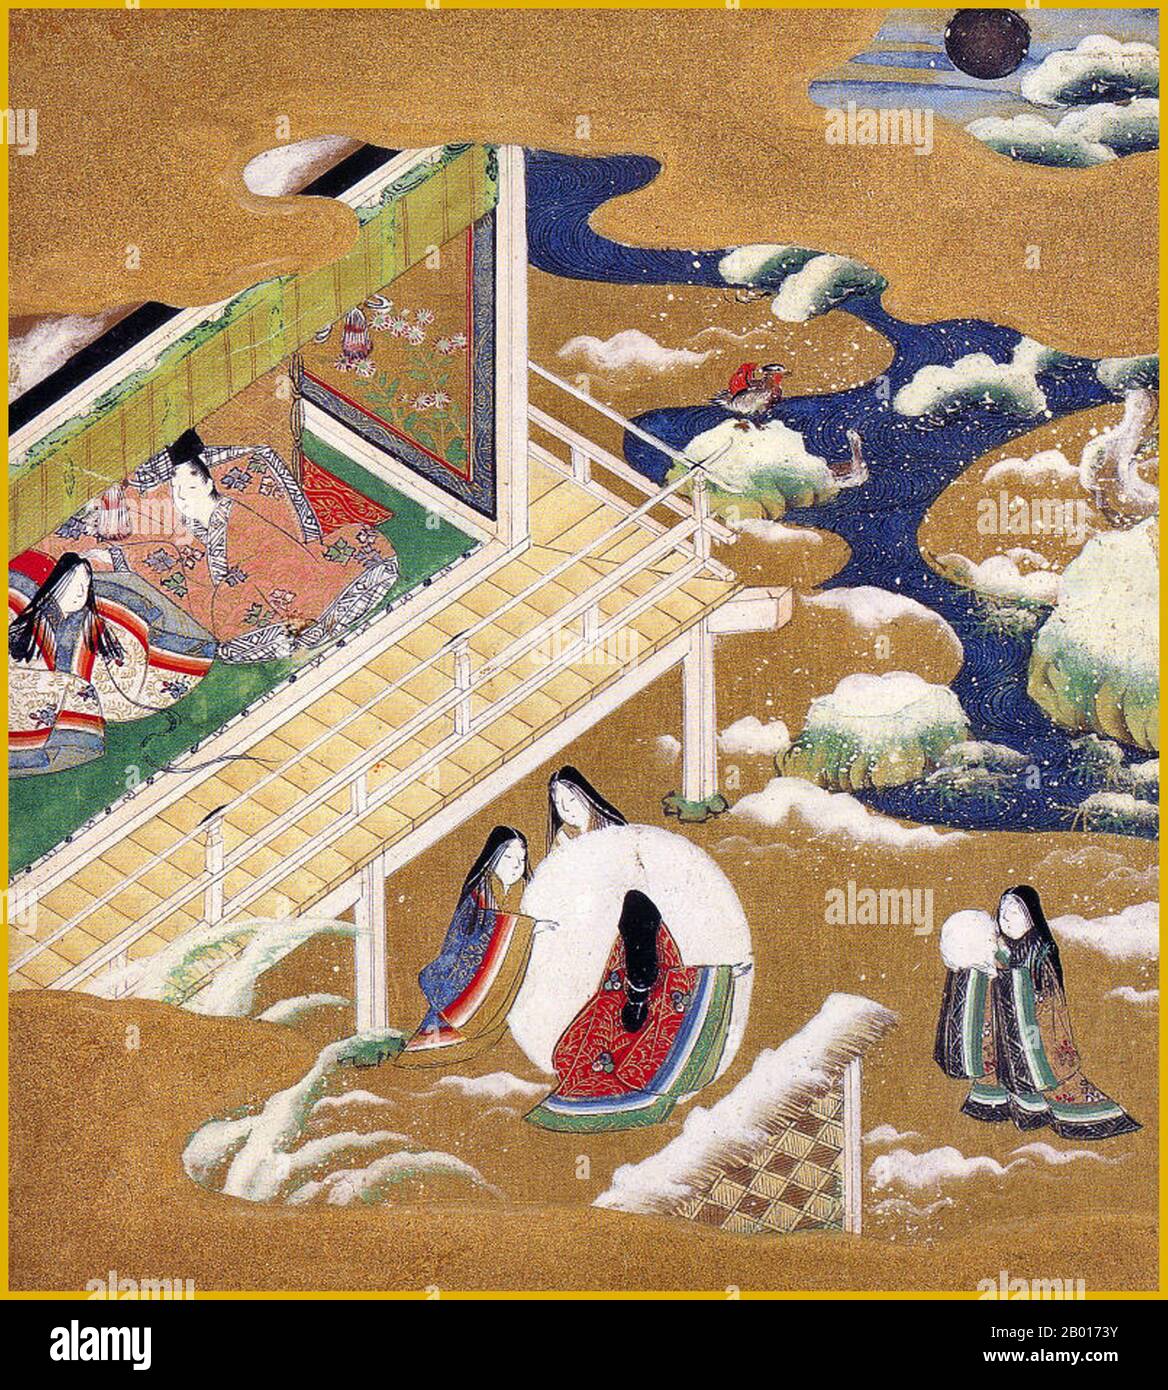 Japan: 'Chapter 20 - Asagao (The Bluebell)'. Illustration from the Genji Monogatari ('Tale of Genji'), by Tosa Mitsuoki (21 November 1617 – 14 November 1691), late 17th century.  'The Tale of Genji' is a work of classical Japanese literature from the early 11th century by lady-in-waiting Murasaki Shikibu. The tale recounts the life of Hikaru Genji, the son of the Japanese emperor, and depicts the lifestyles of high courtiers during the Heian period. It is considered by some as the world's first novel, and was written in an archaic and poetic style that is now almost unreadable. Stock Photo